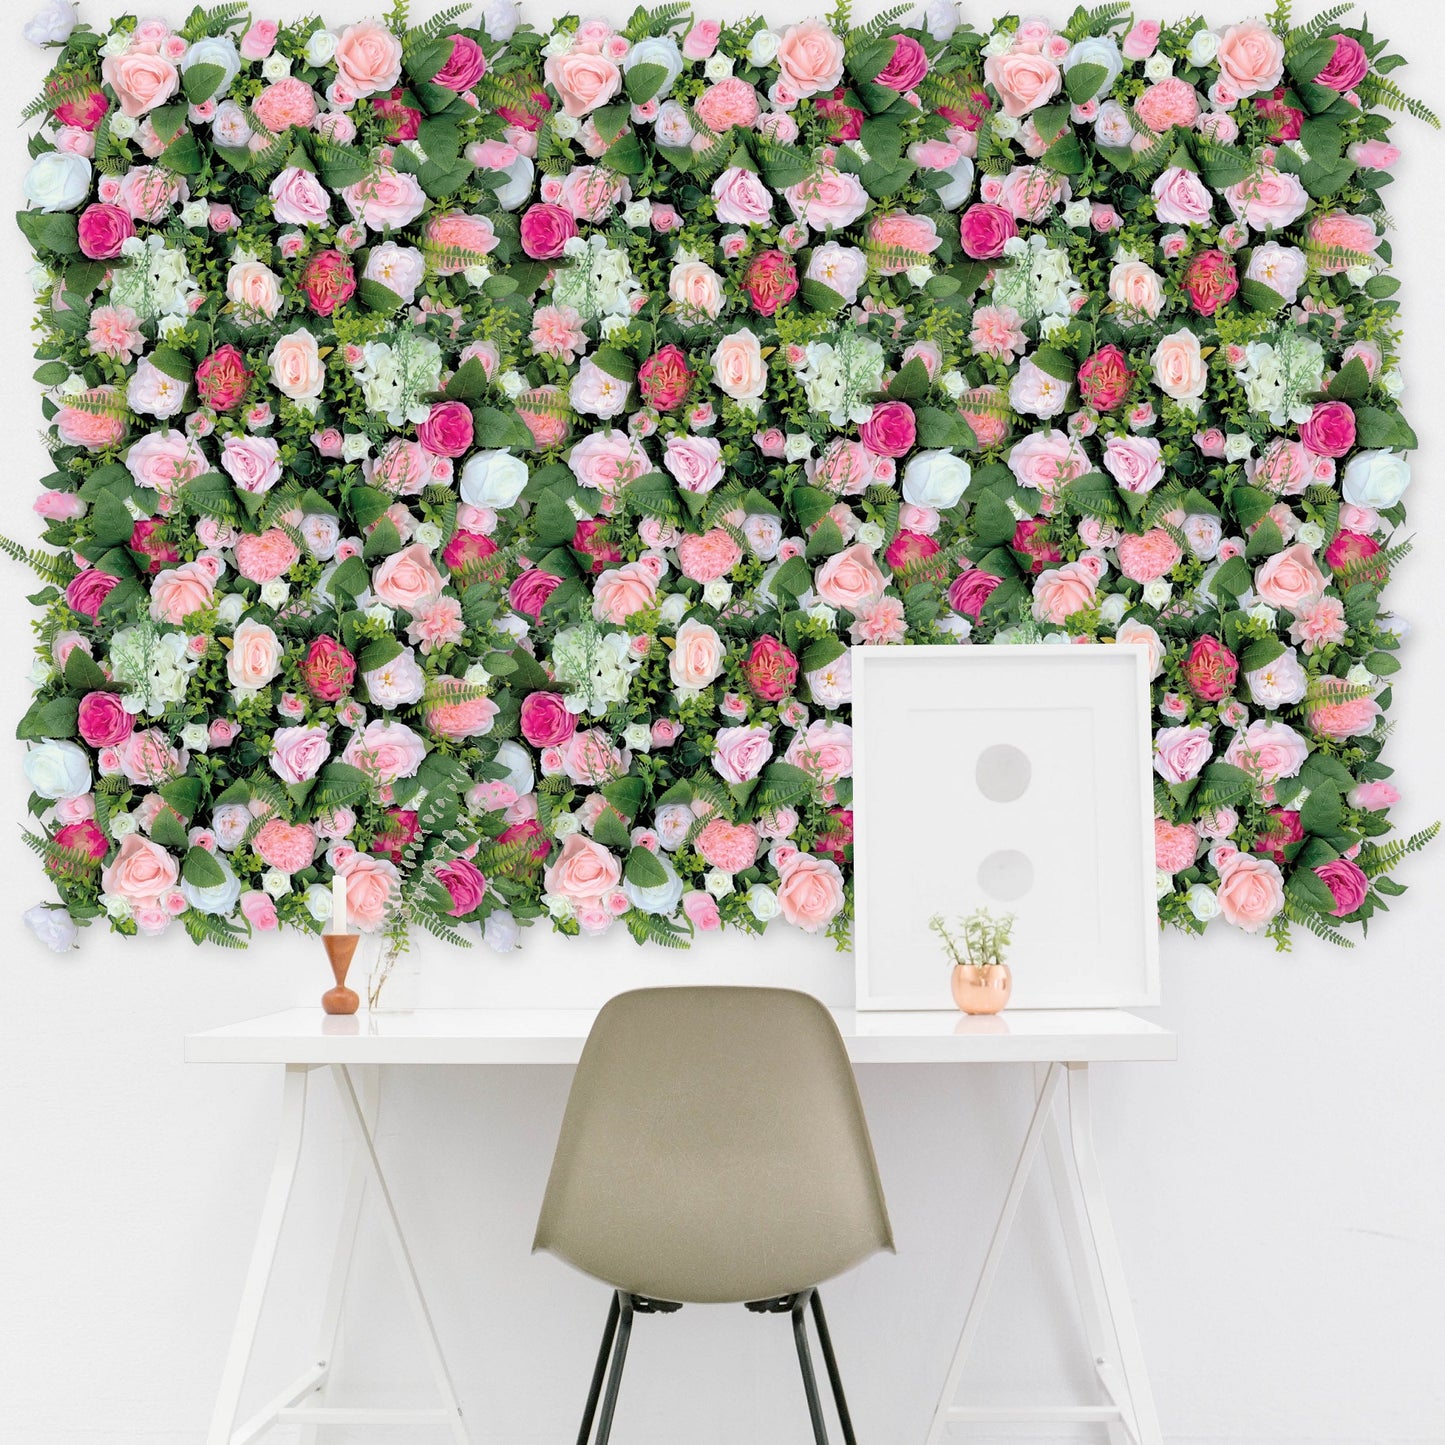 Flower wall "RASPBERRY GARDEN" made of Realtouch artificial plants